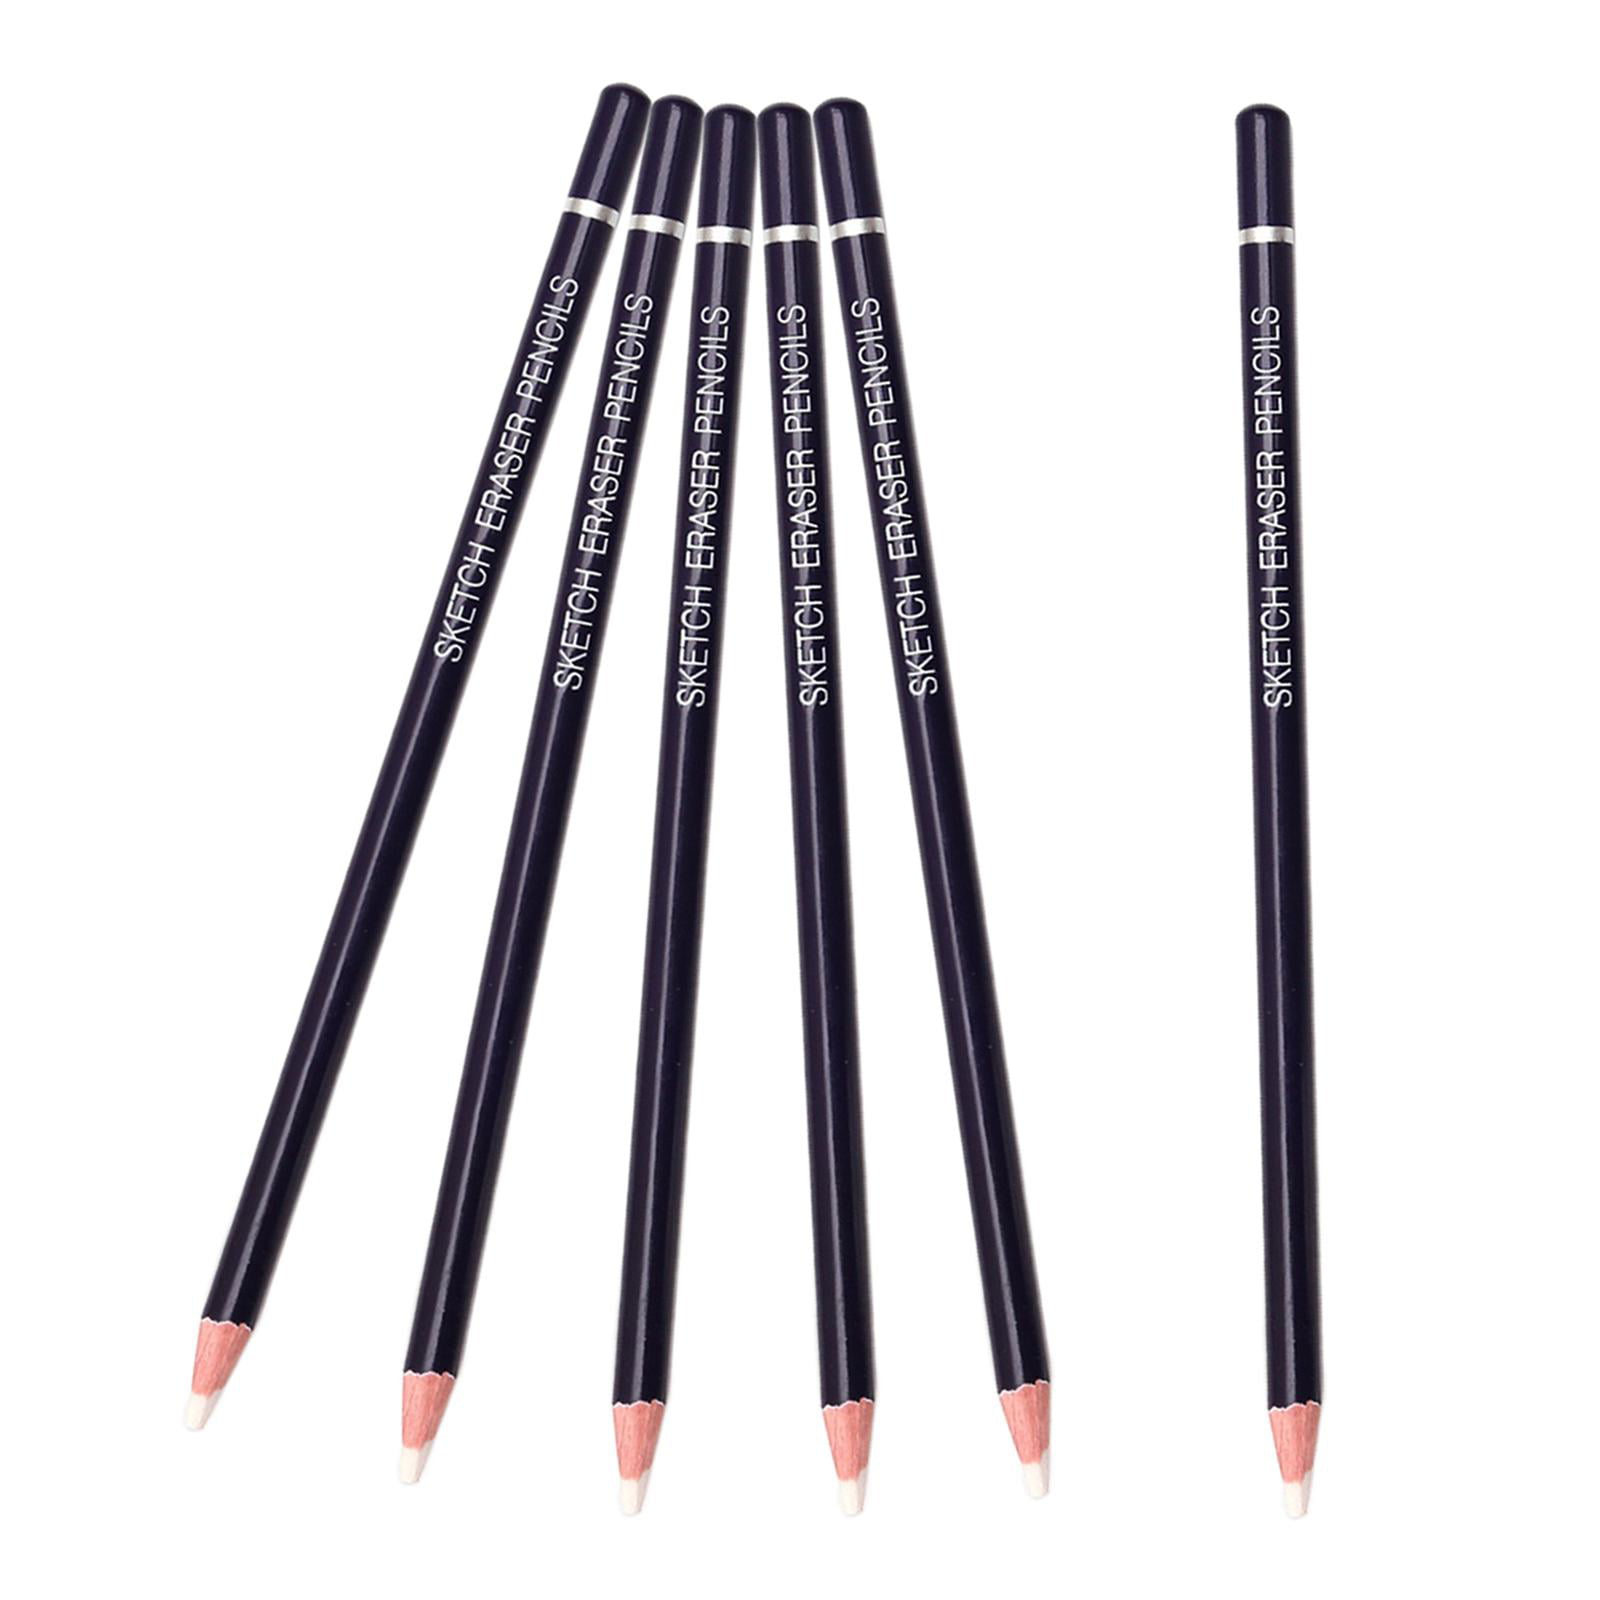 12pc HB Eraser Tipped Pencil Rubber Writing Drawing Office School Student Supply 